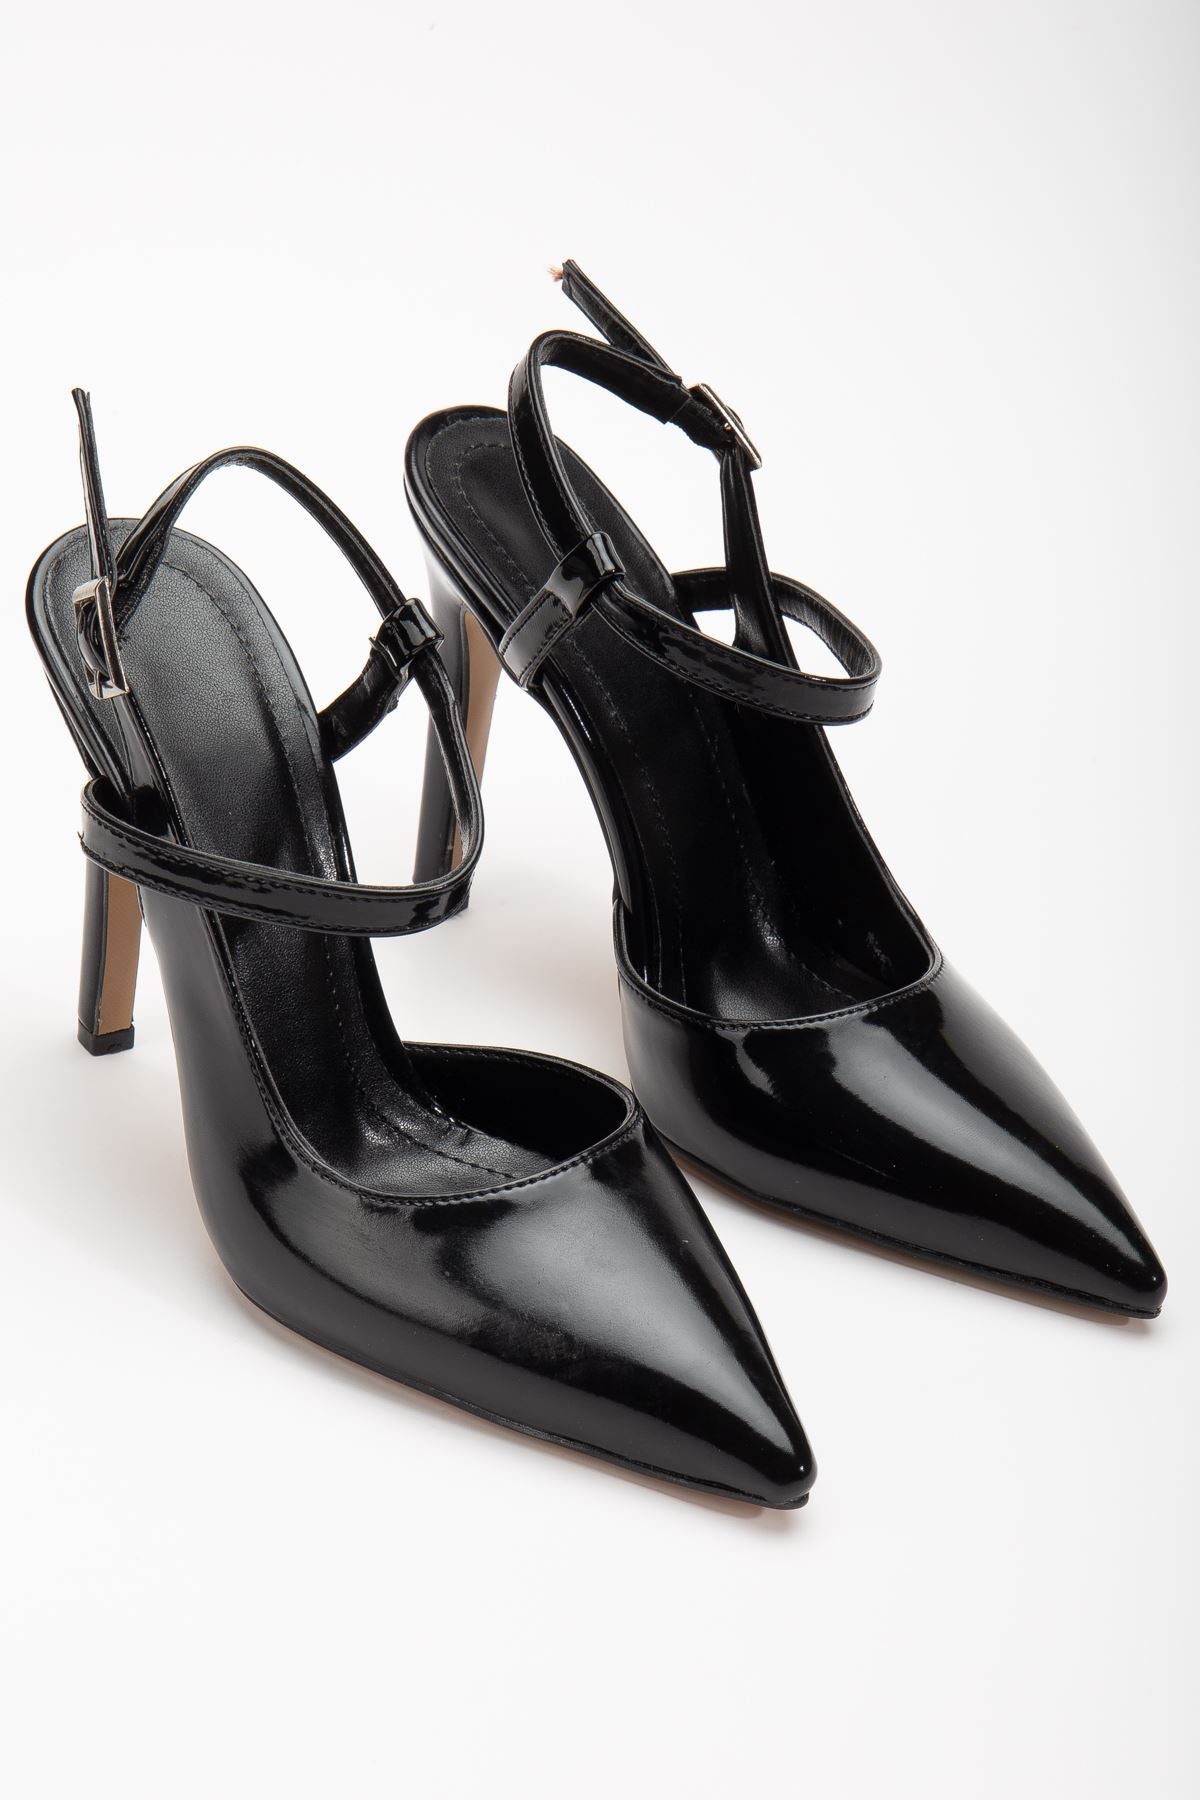 Nely Black Patent Leather Pointed Women's Heeled Shoes - STREETMODE™